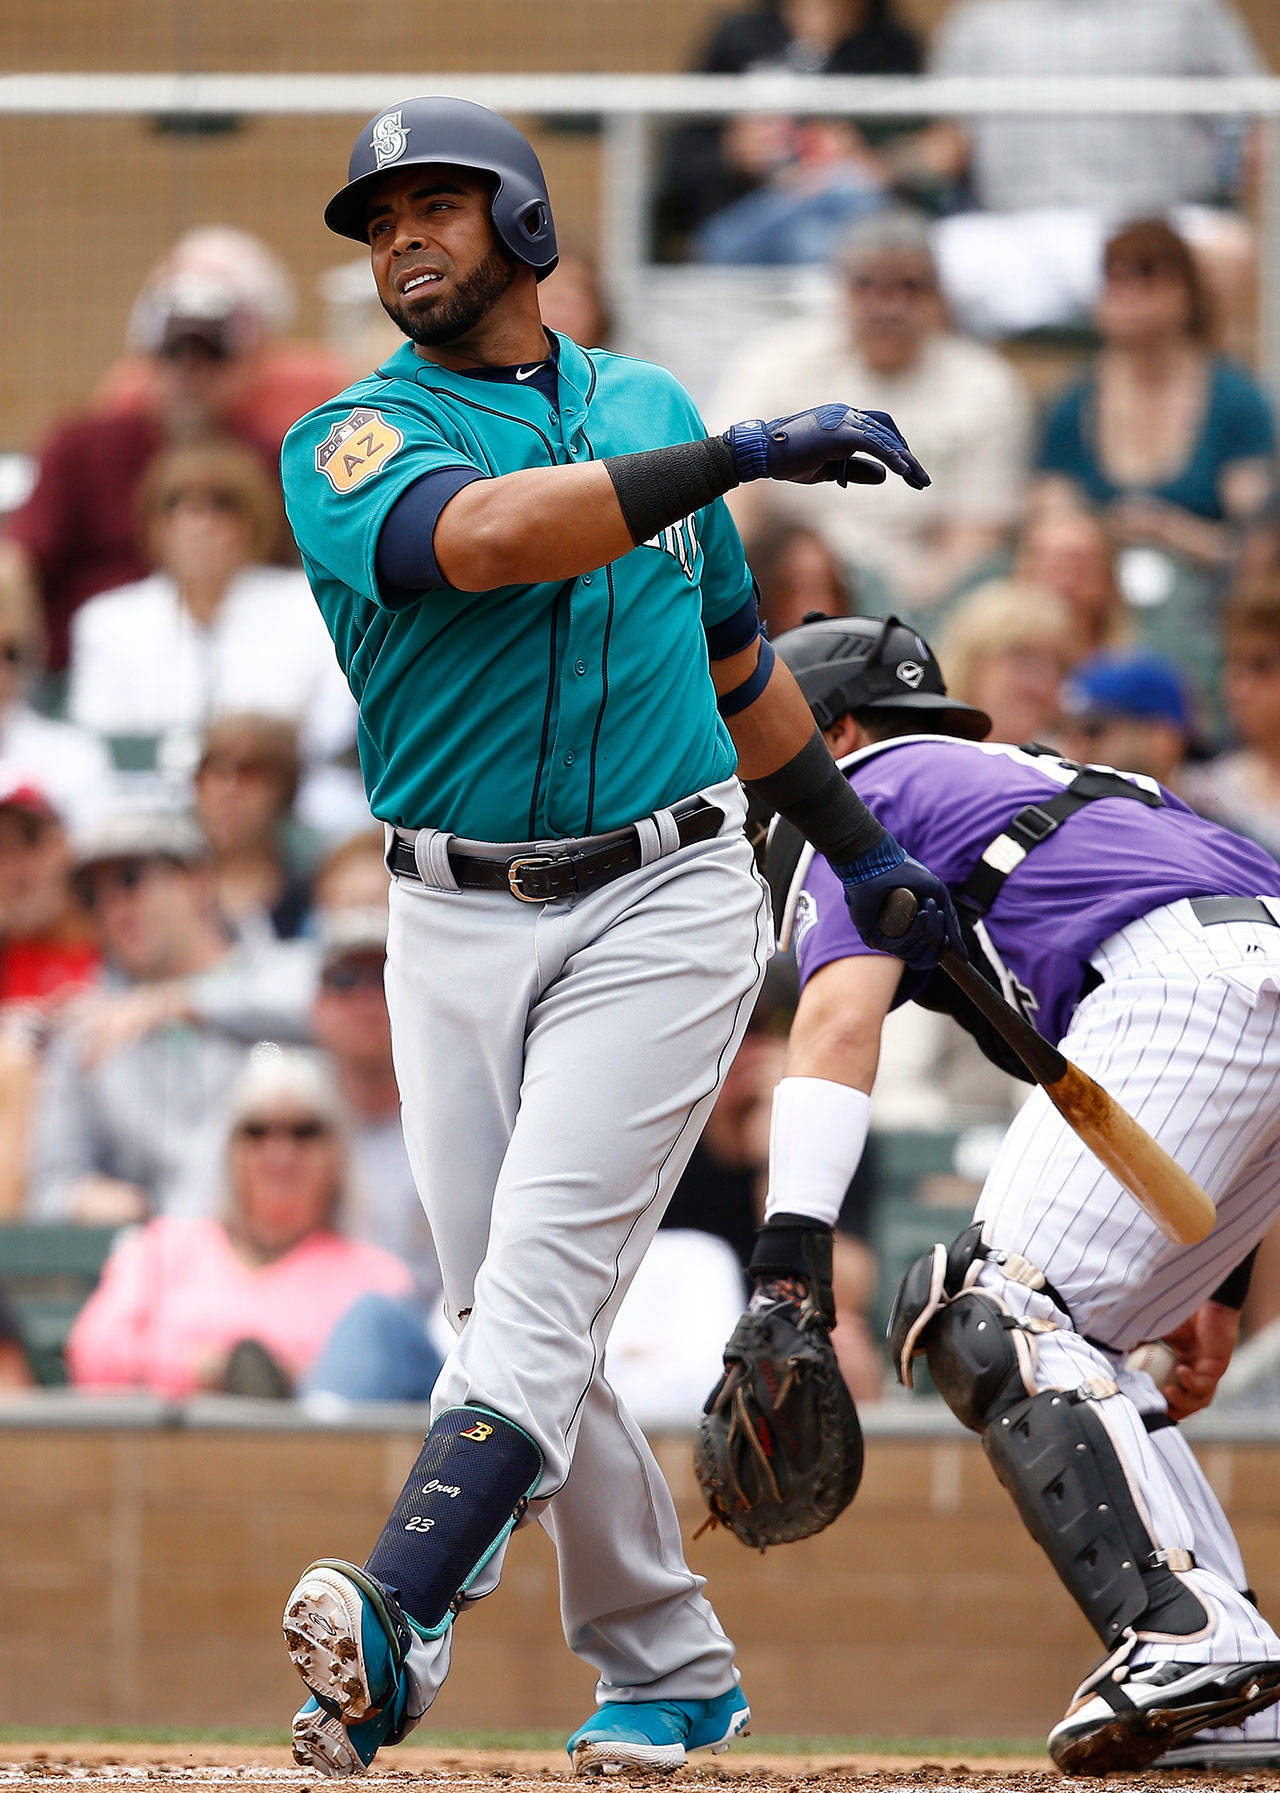 The Mariners’ Nelson Cruz swings and fouls off a pitch during a spring training game against the Rockies on April 1, 2017, in Scottsdale, Ariz. (AP Photo/Ross D. Franklin)